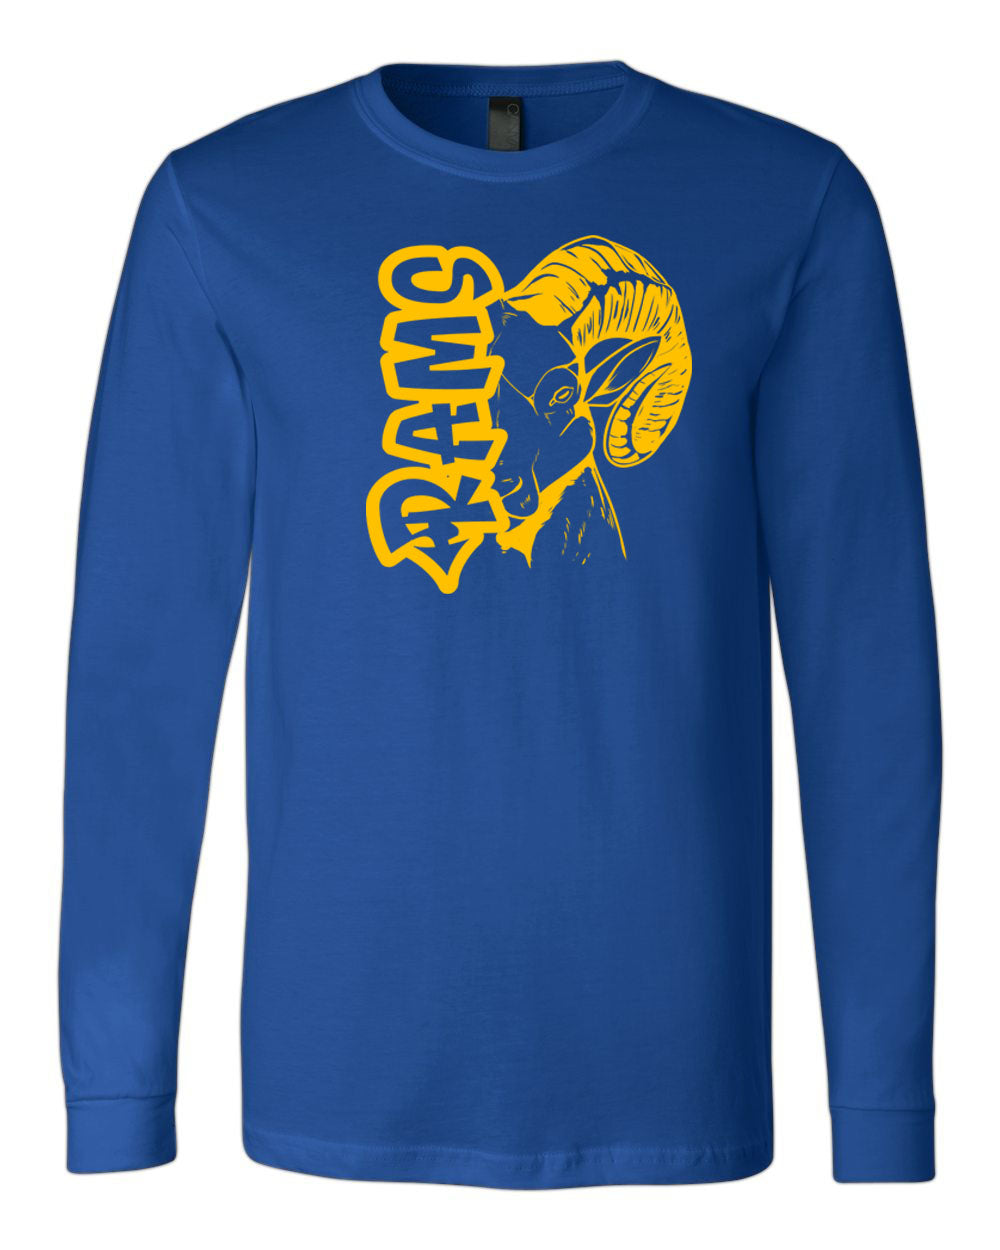 Sussex Middle Design 7 Long Sleeve Shirt